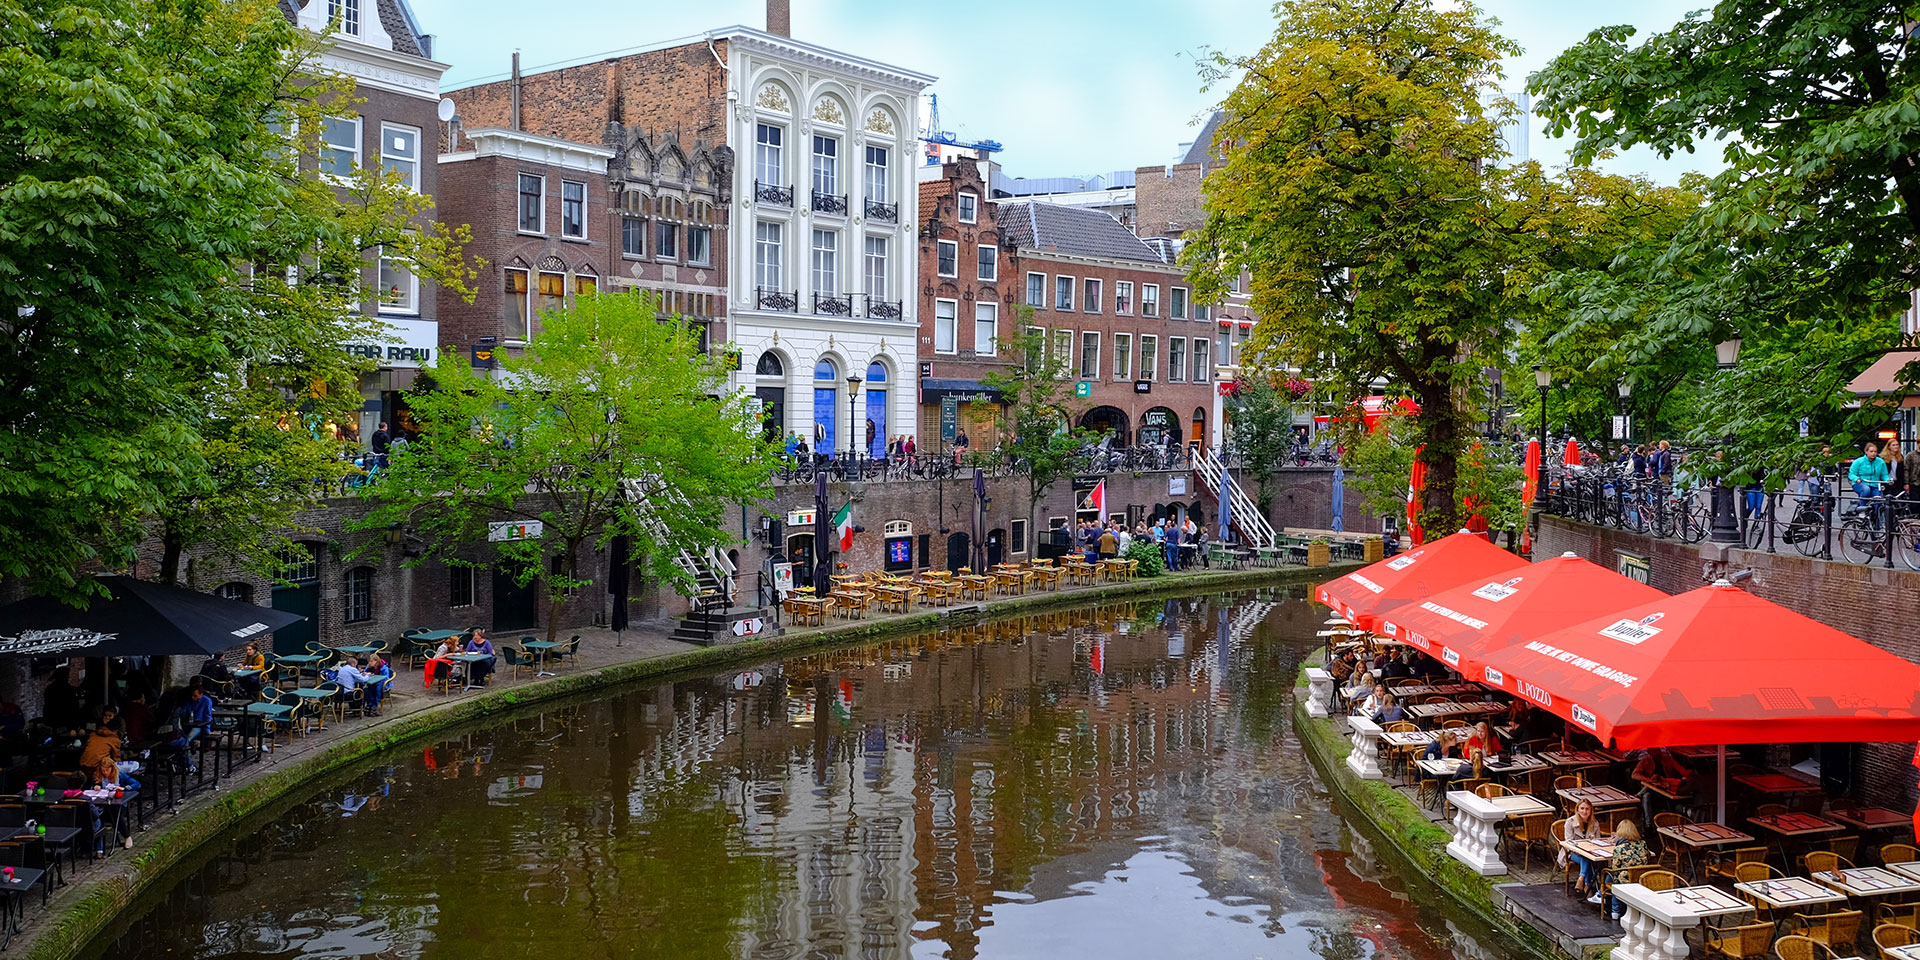 Get a Cheese Fix or Hit the Beach? The 4 Best Amsterdam Day Trips